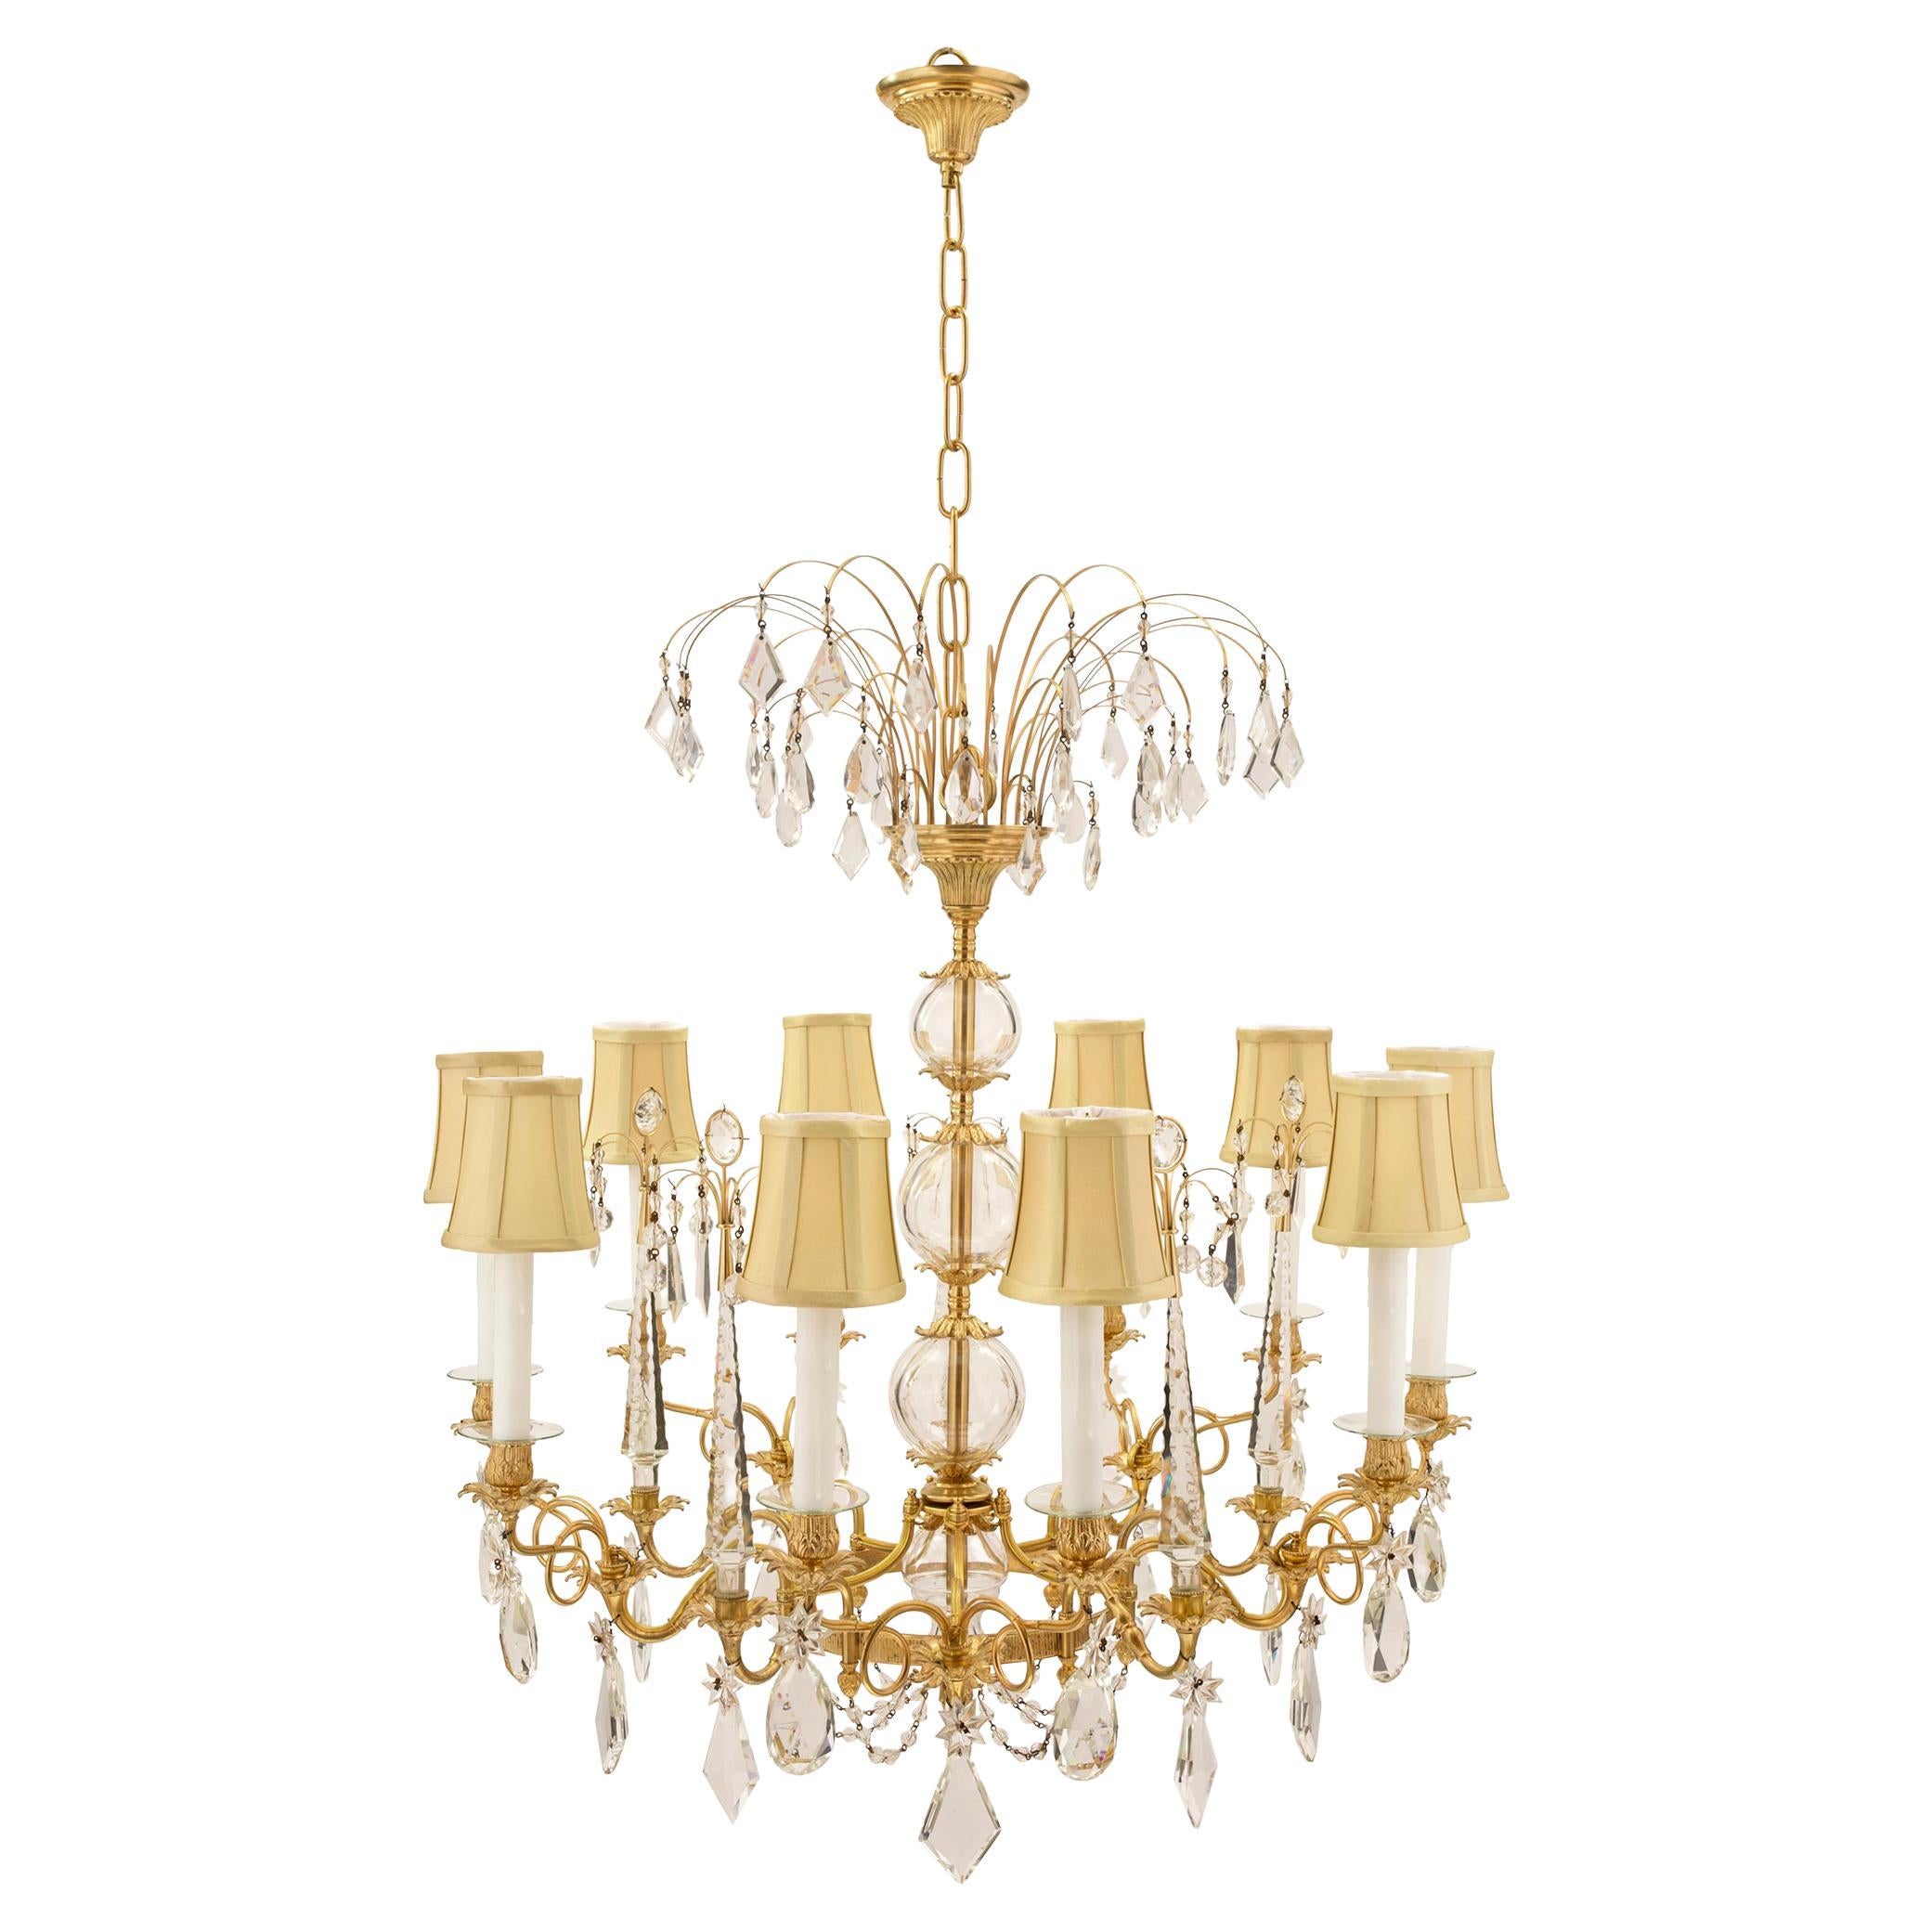 Russian 19th Century Neoclassical Style Ormolu and Crystal Chandelier For Sale